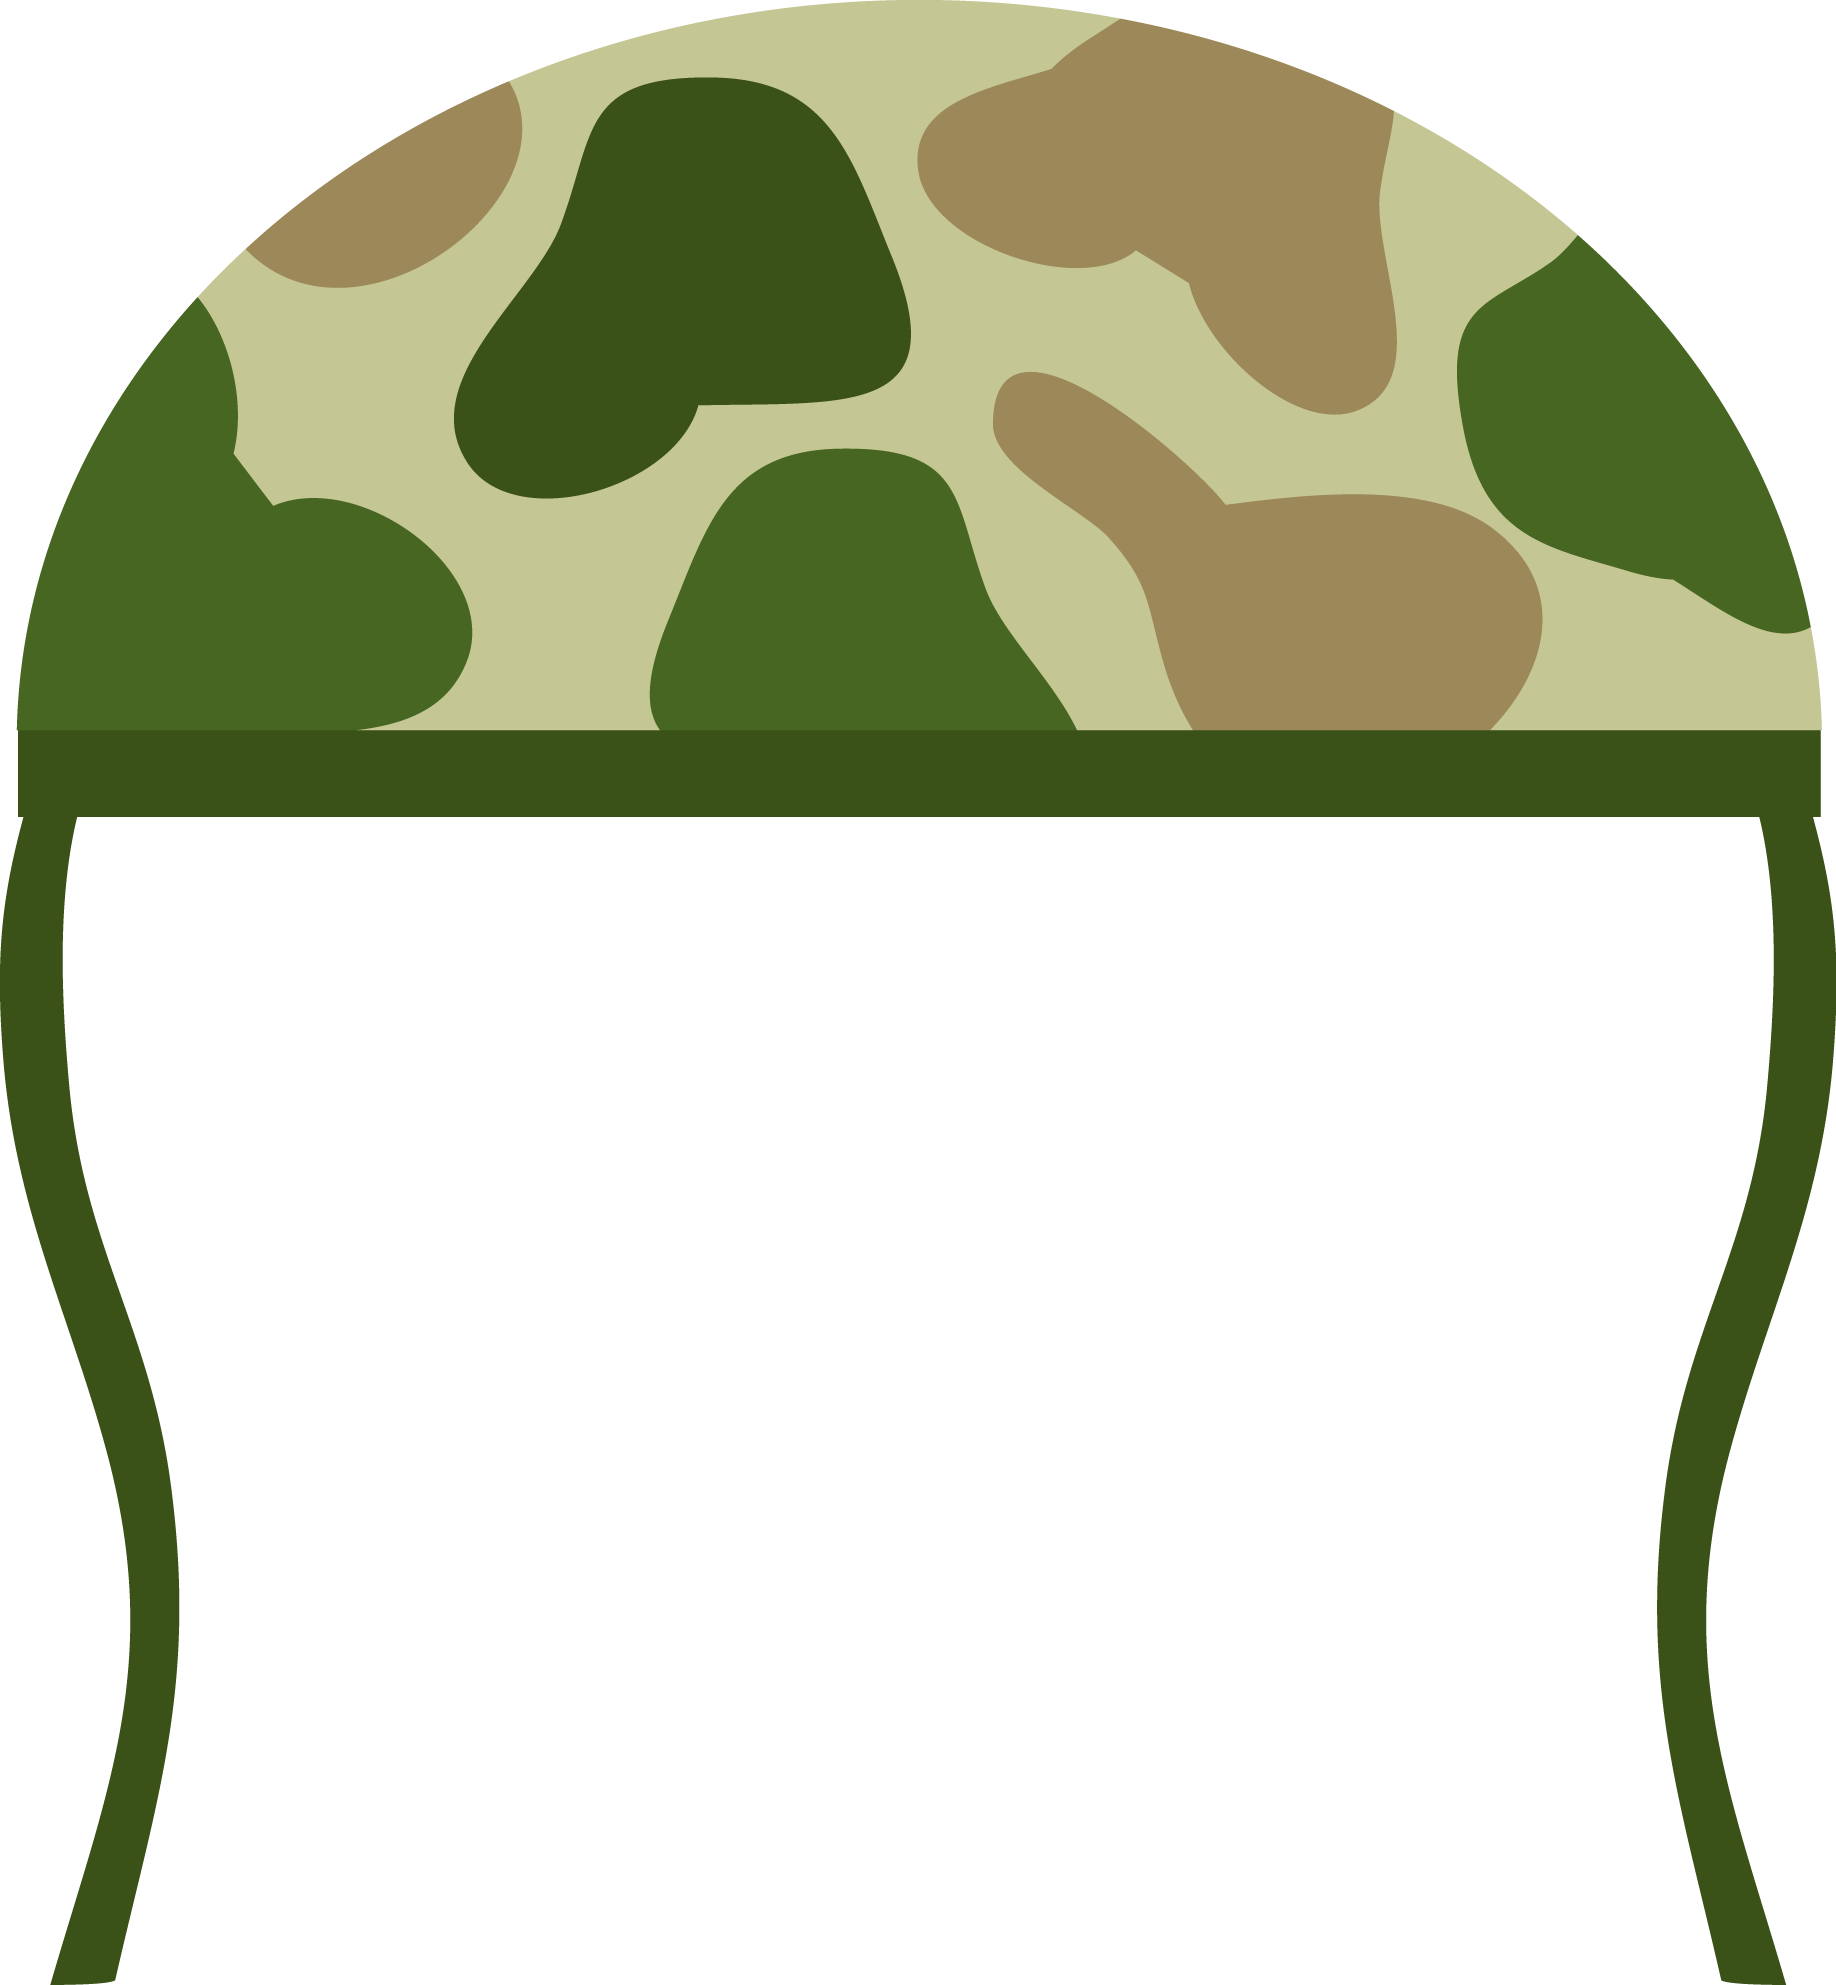 military clipart army woman